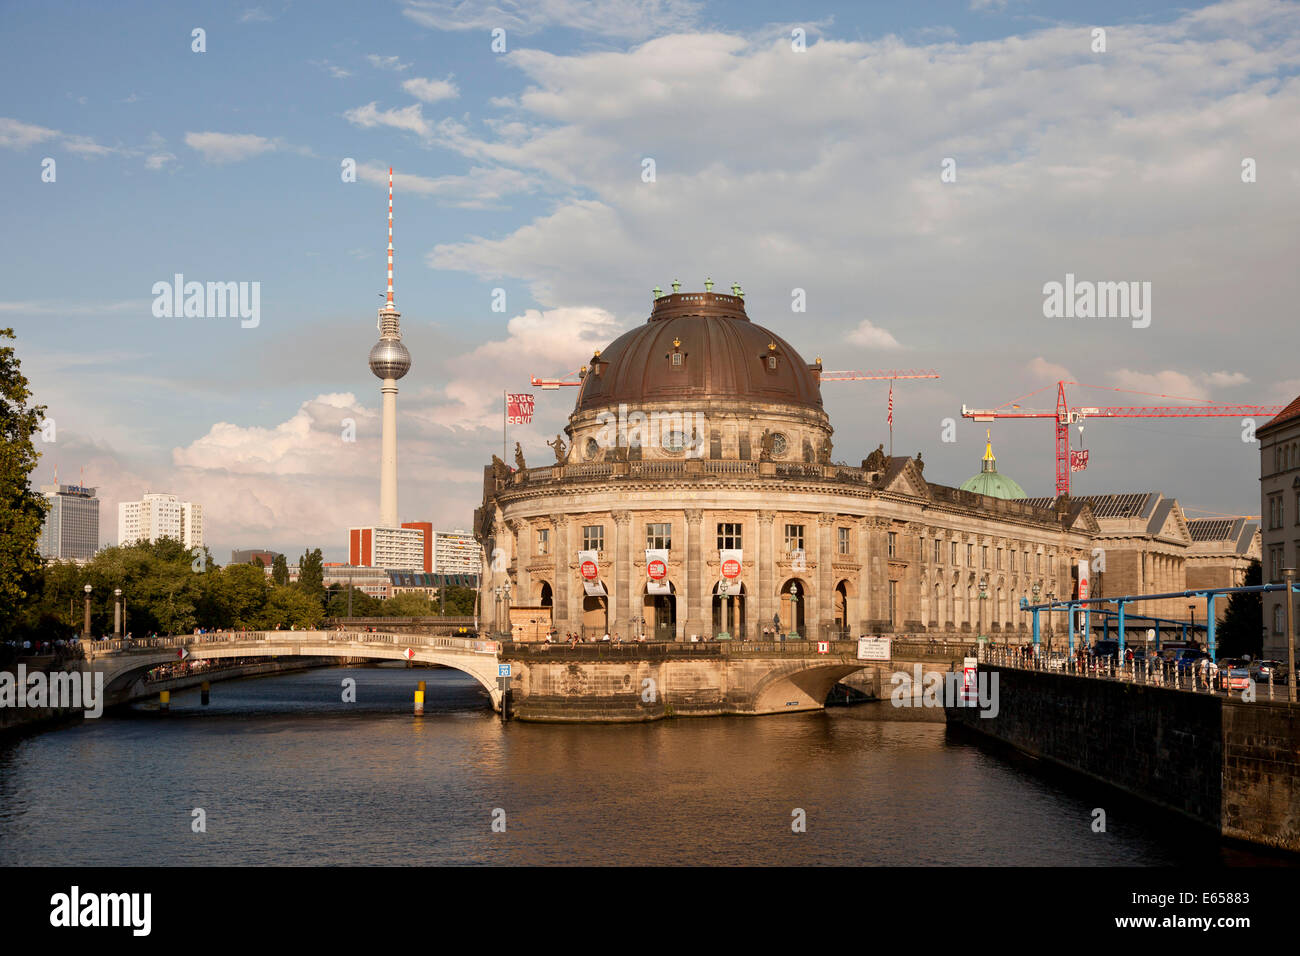 The Bode Museum at the northern end of the Museum Island in the Spree river and the Fernsehturm / Berlin TV Tower, Berlin, Germa Stock Photo